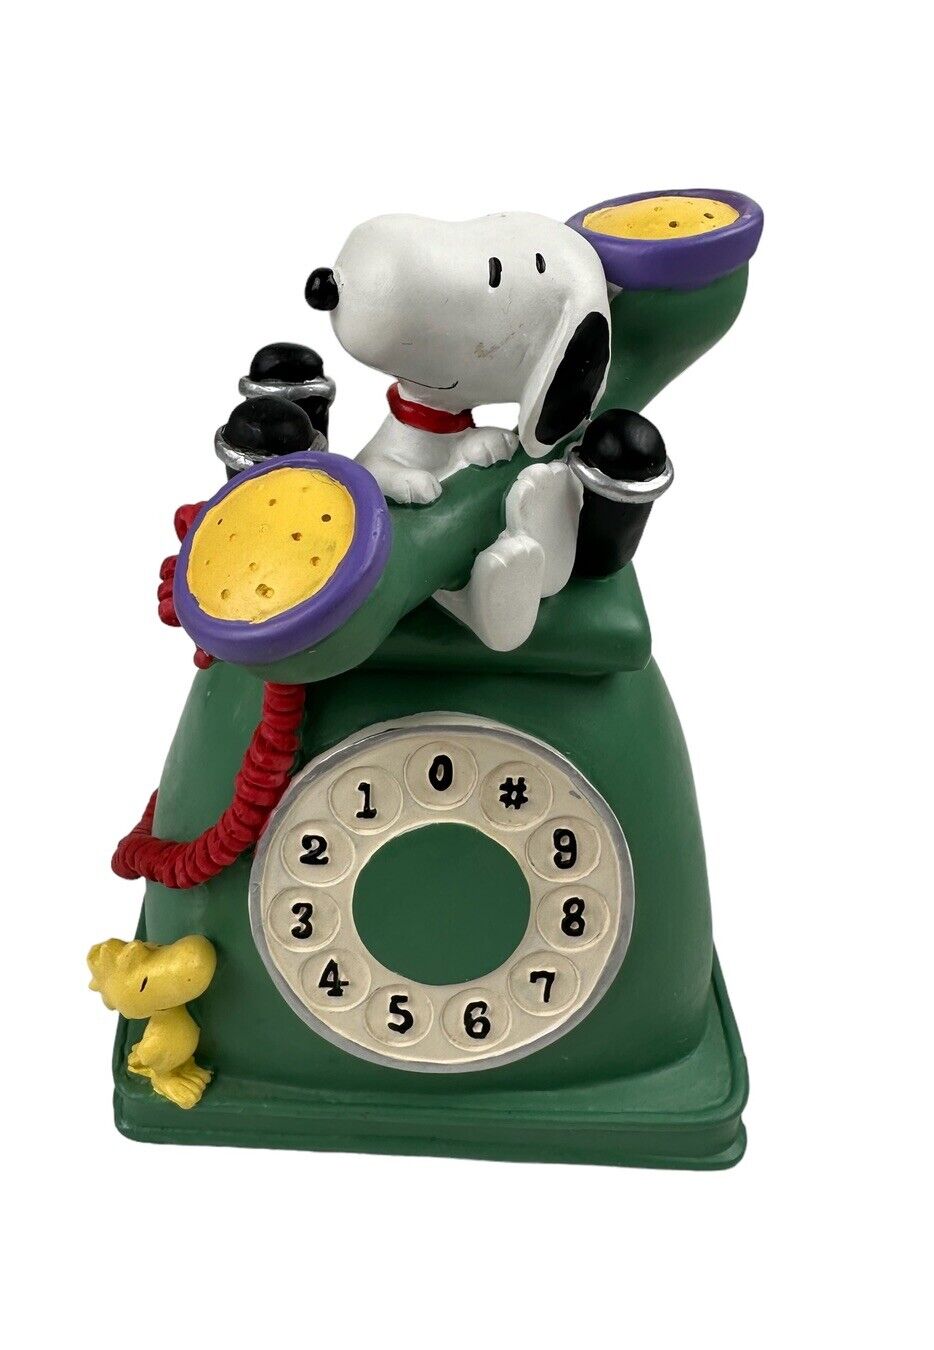 Peanuts SNOOPY PHONE BANK Woodstock Coin Bank RC7567 UFS United Feature Synd